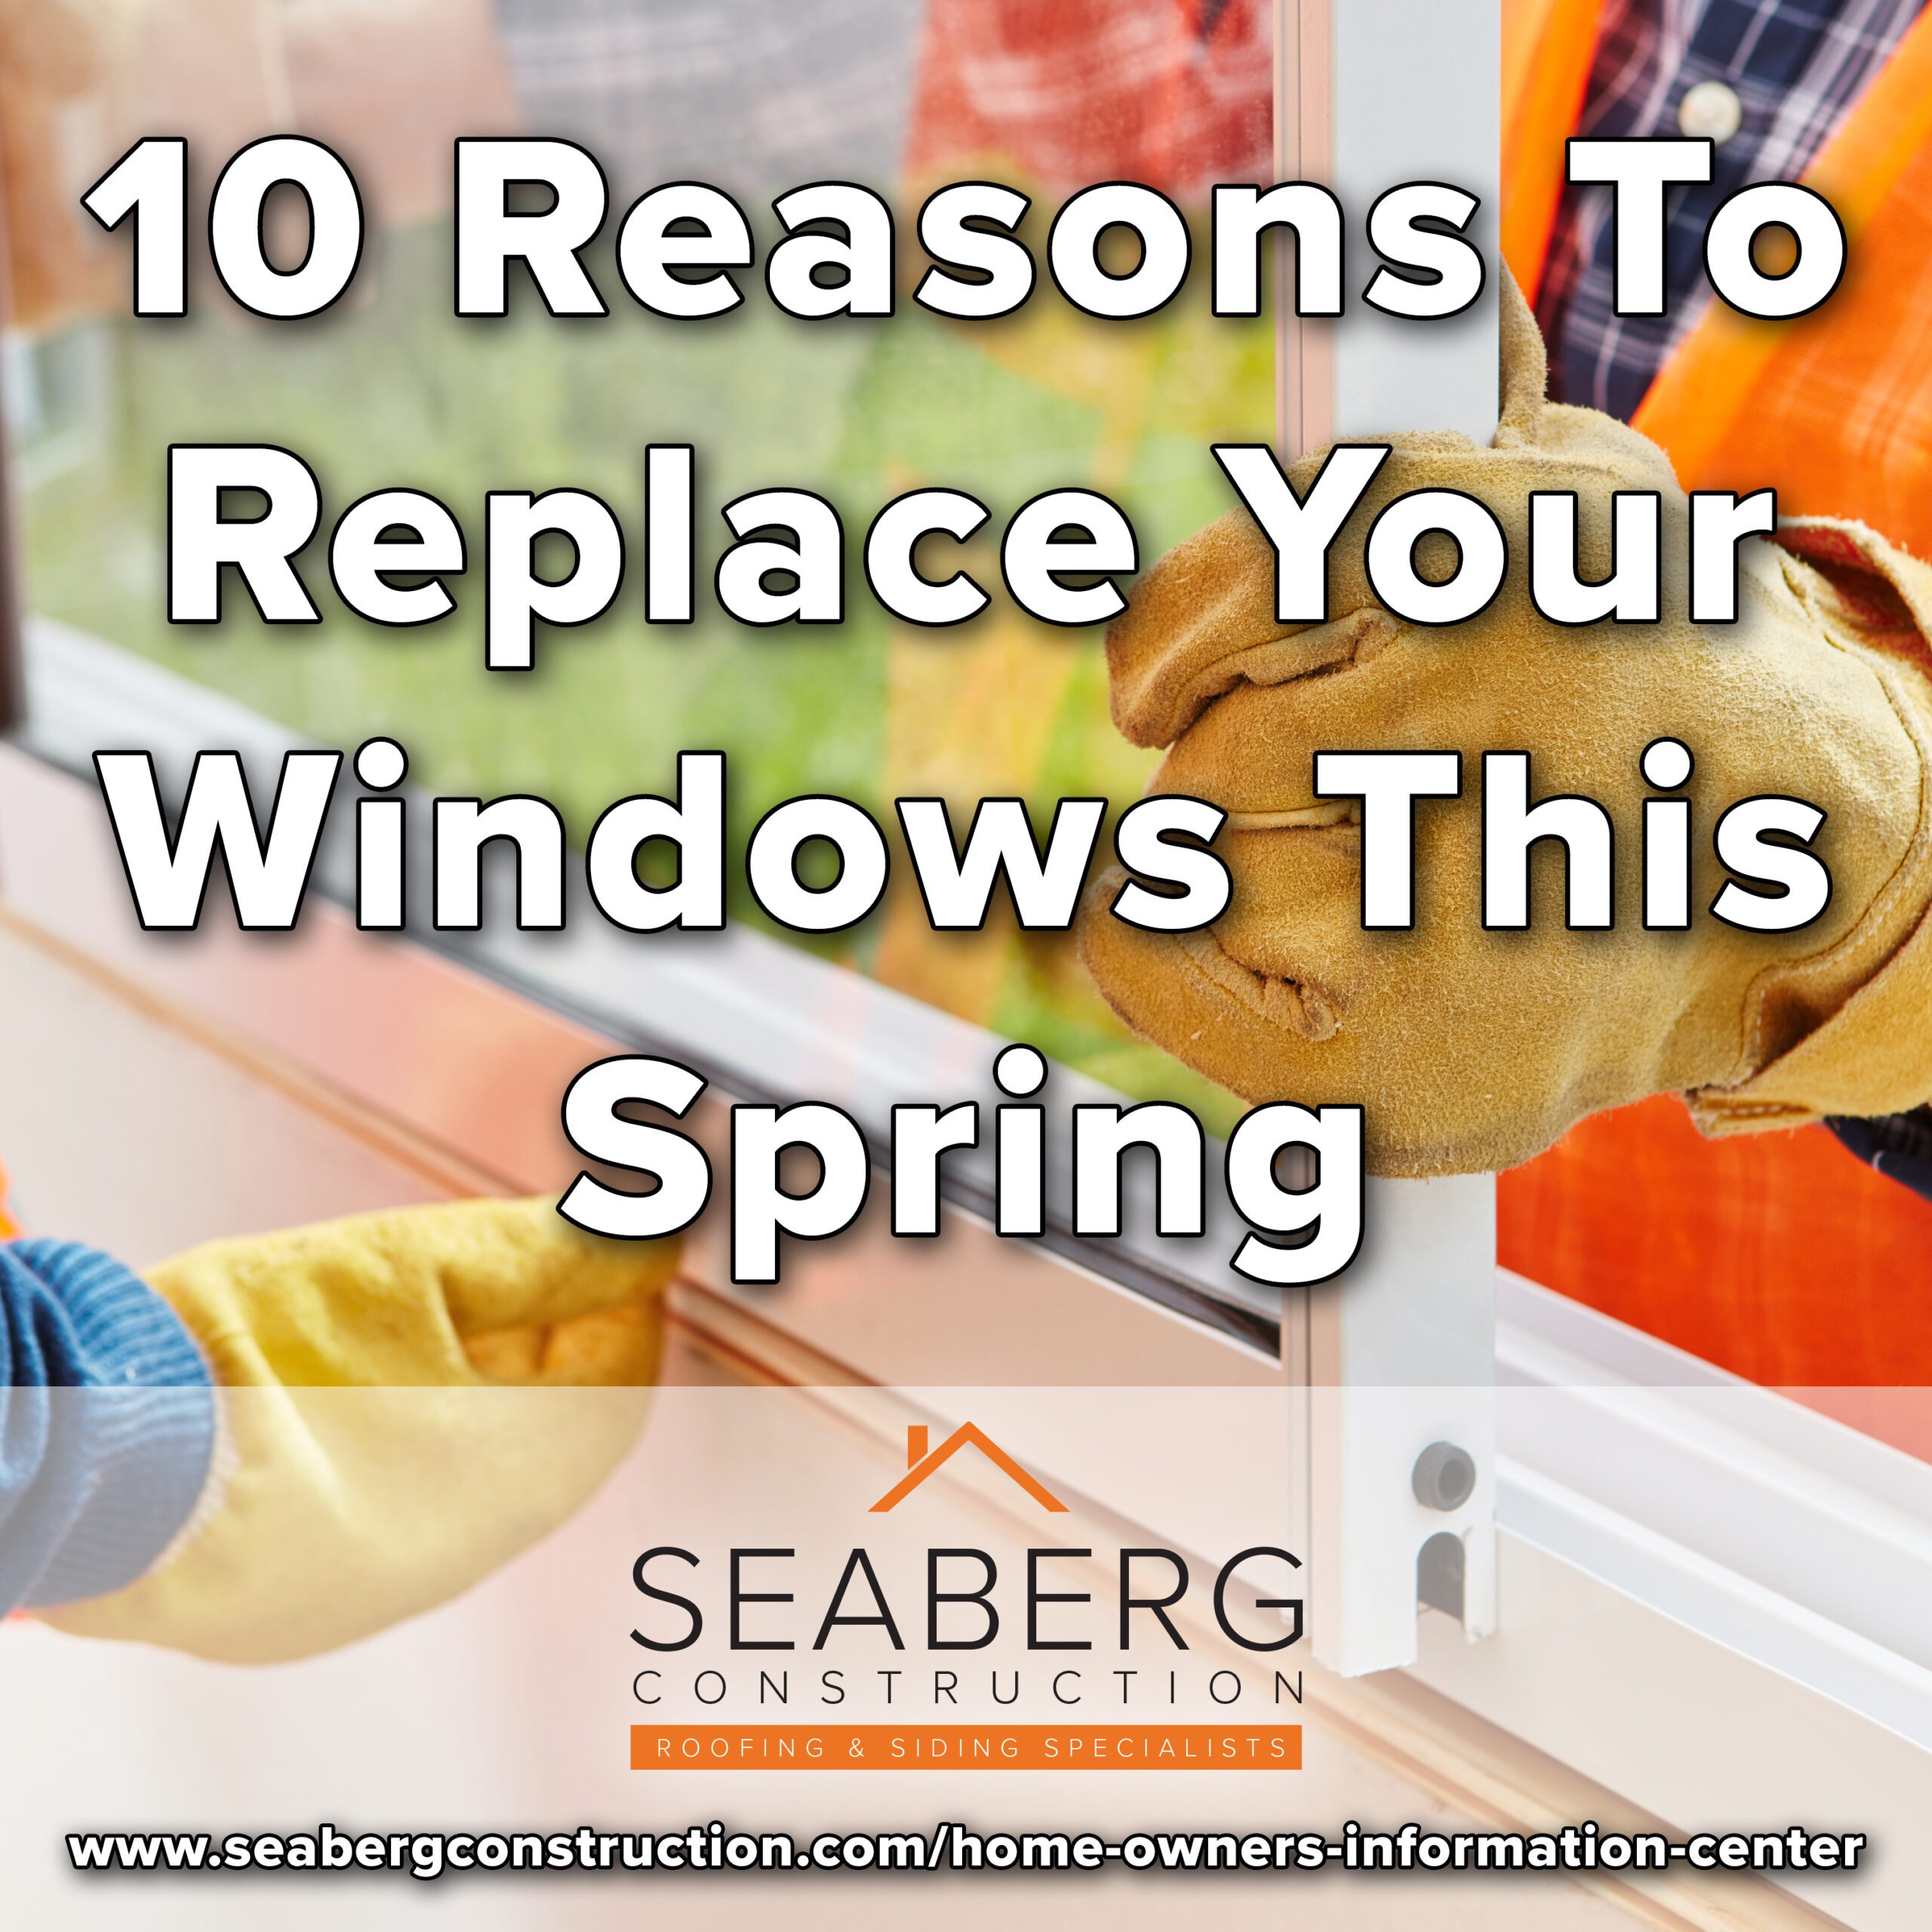 10 Reasons to Replace Your Windows This Spring